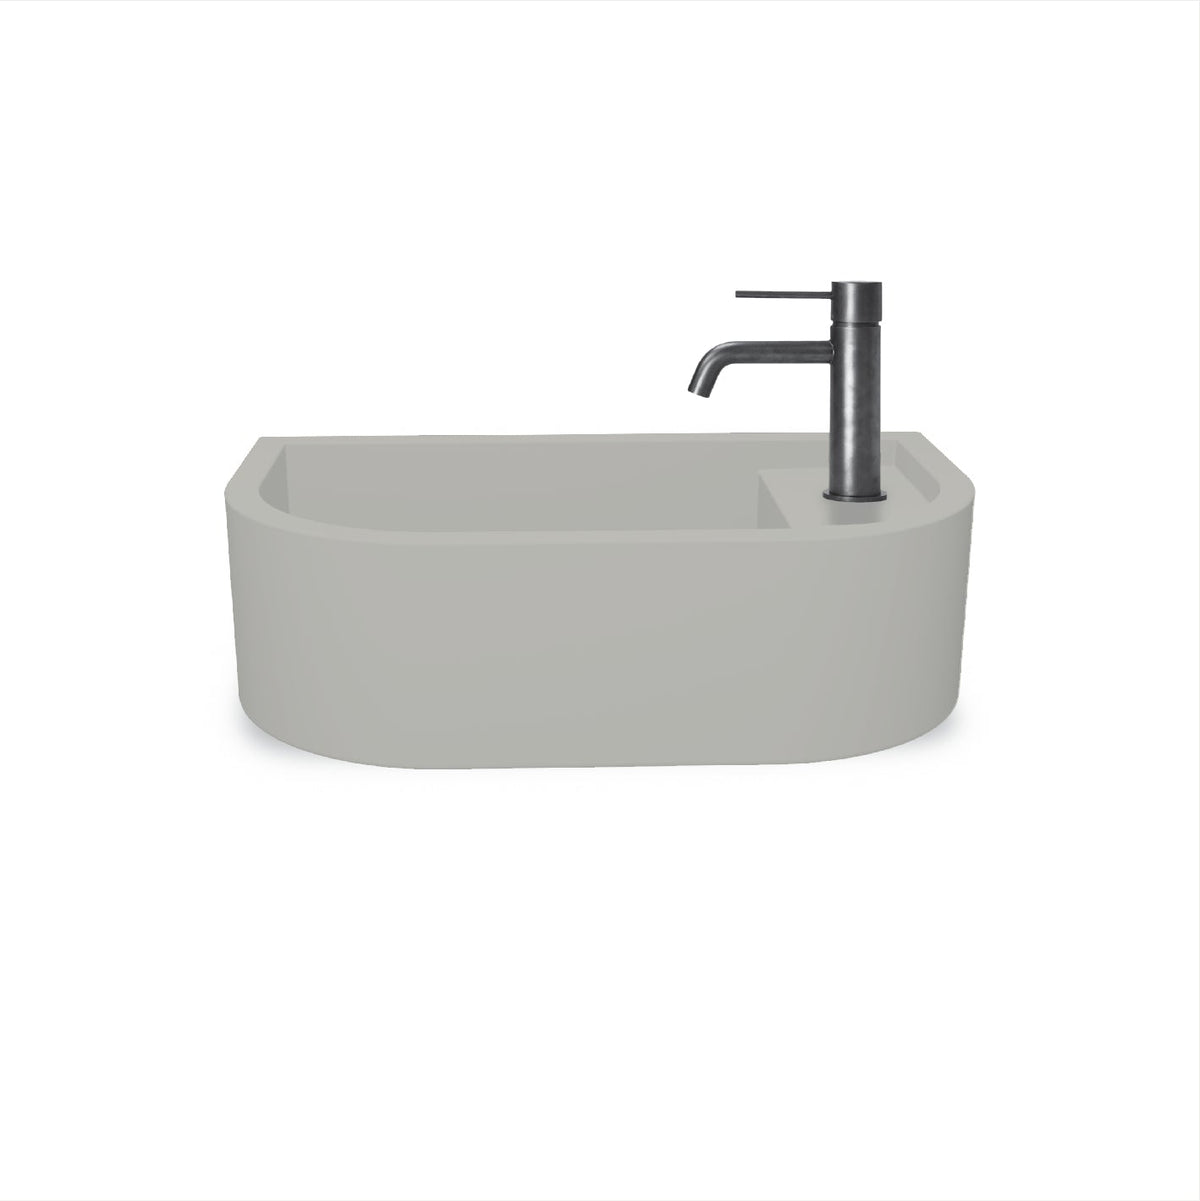 Loop 01 Basin - Overflow - Surface Mount (Ivory,Tap Hole,Chrome)